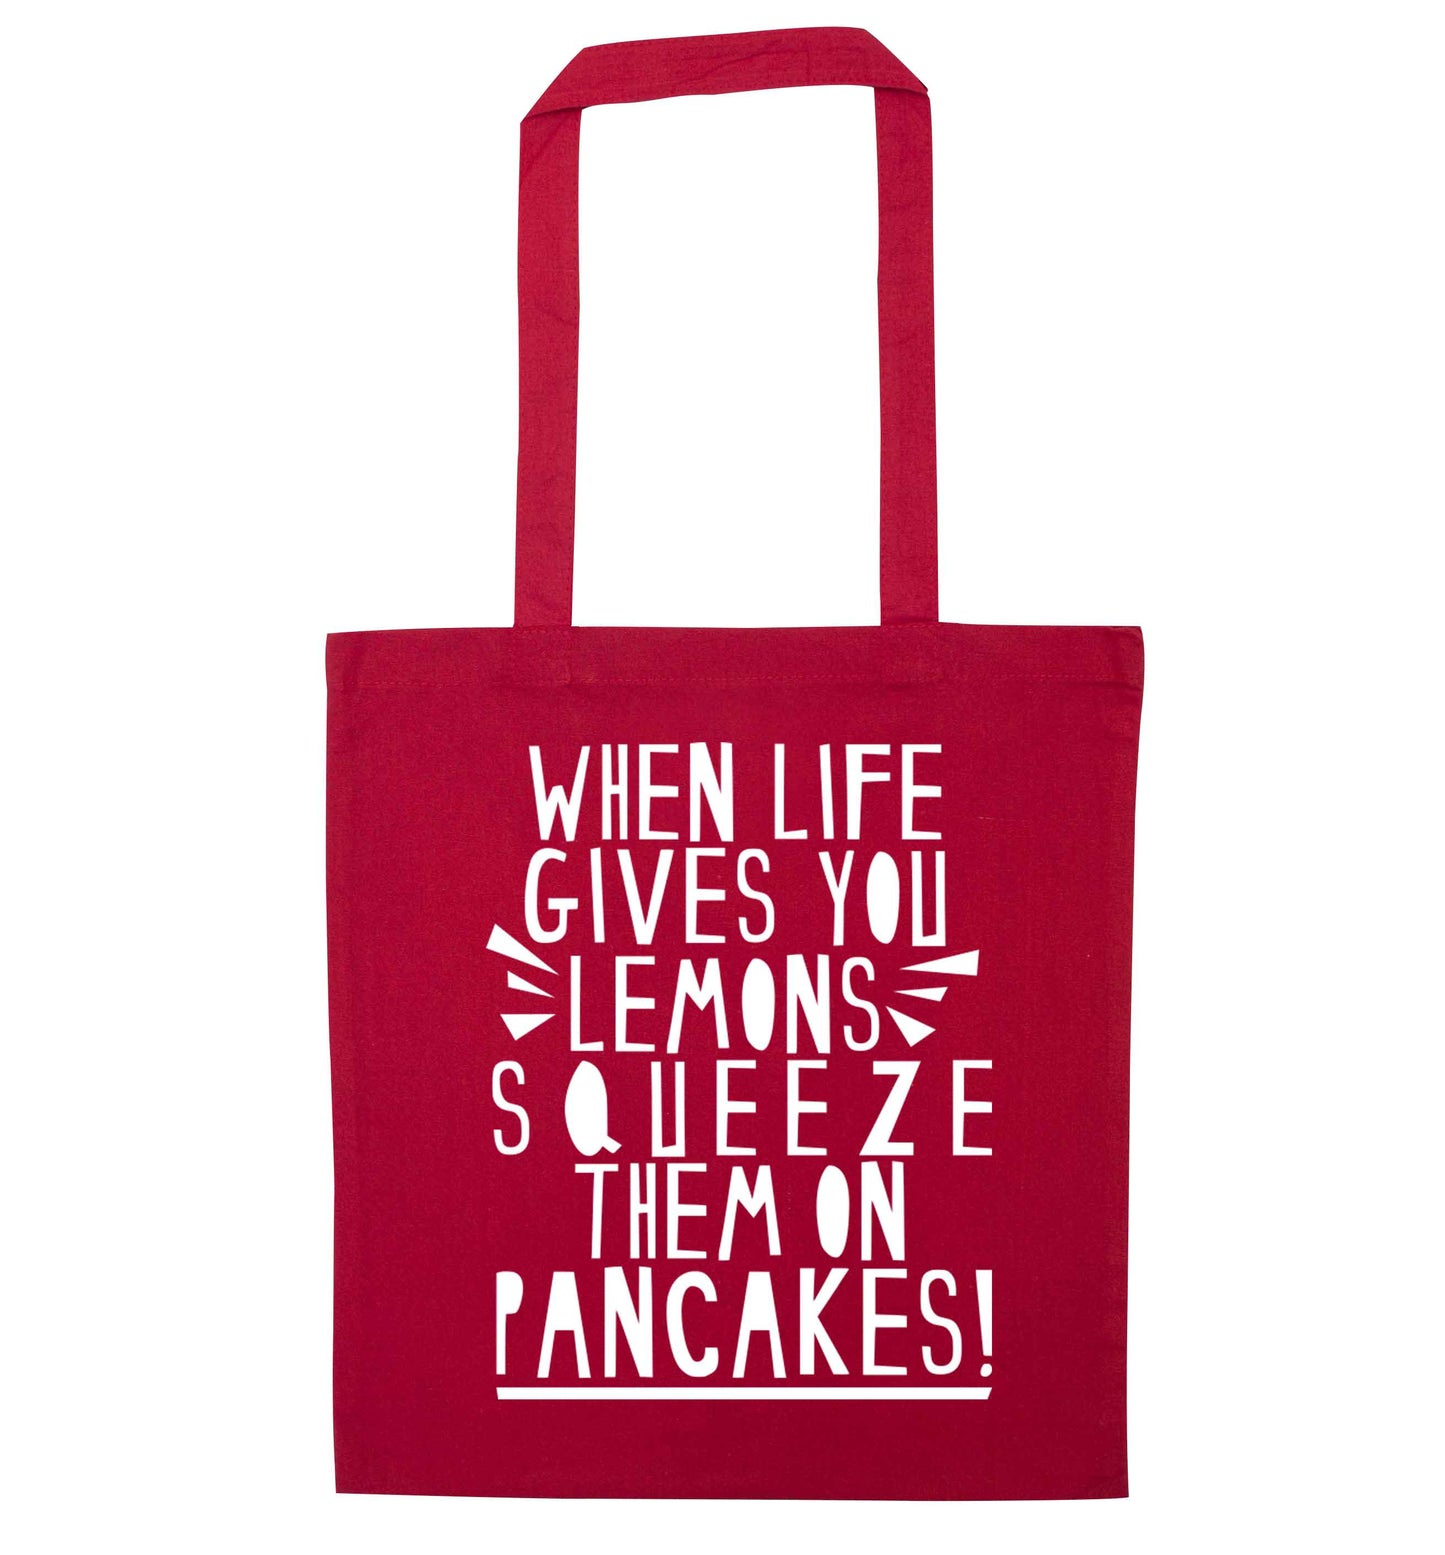 When life gives you lemons squeeze them on pancakes! red tote bag